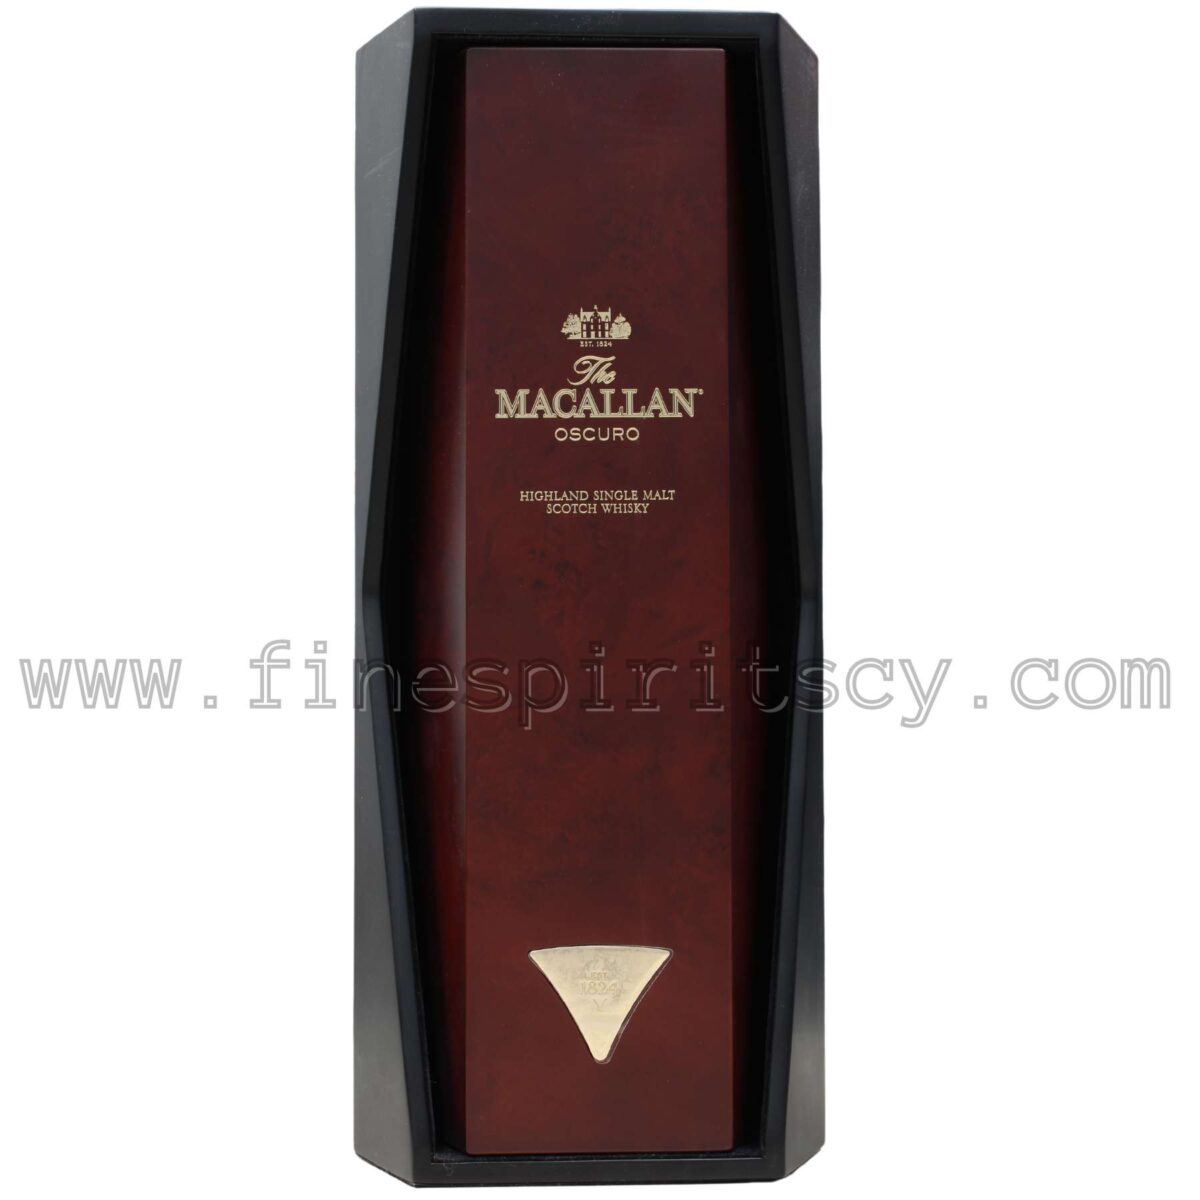 Macallan Oscuro Whisky Whiskey Online CY Cyprus Scotch Speyside Highland